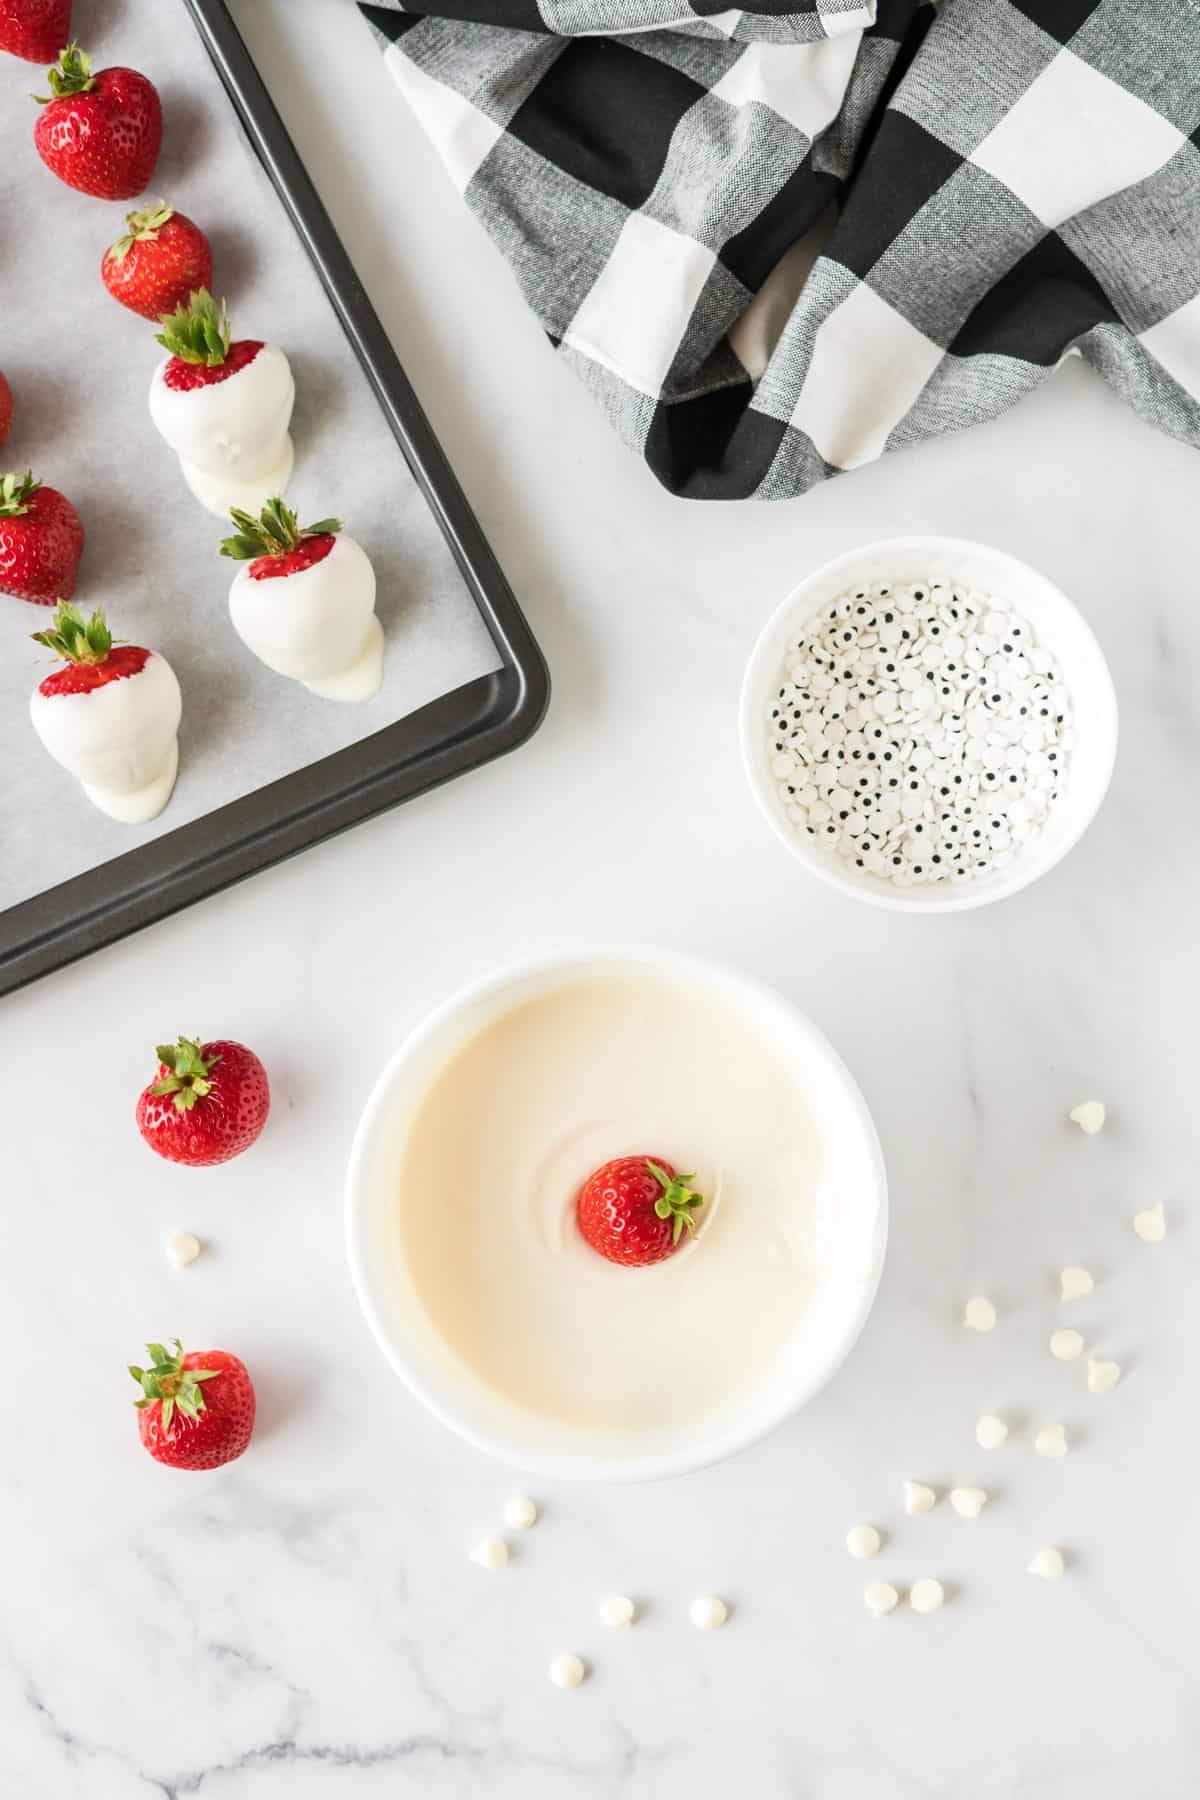 strawberry being dipped into white chocolate in a bowl